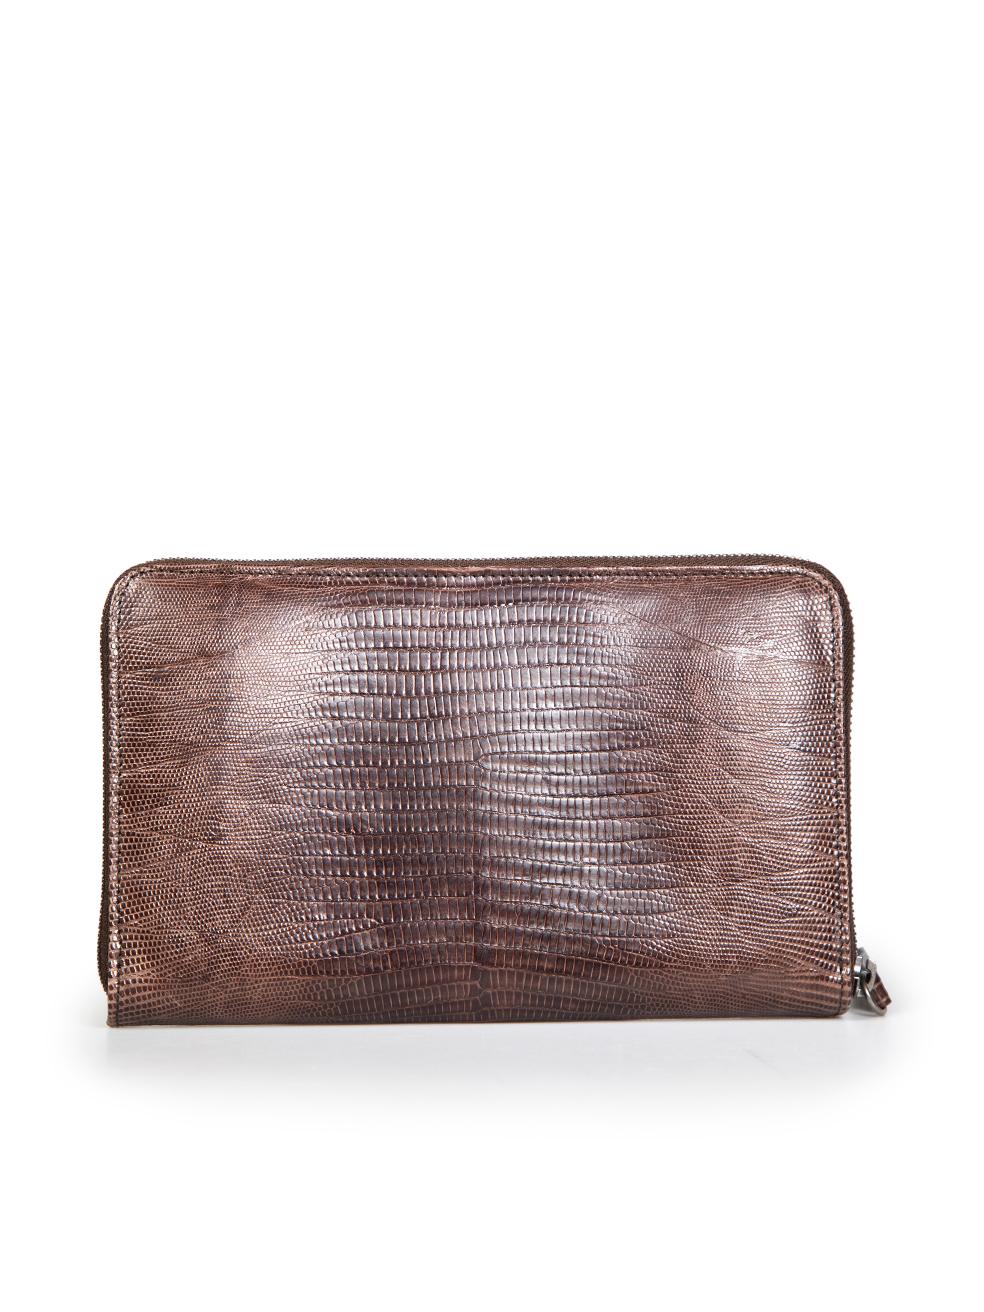 Brunello Cucinelli Brown Lizard Leather Zip Clutch Bag In Excellent Condition For Sale In London, GB